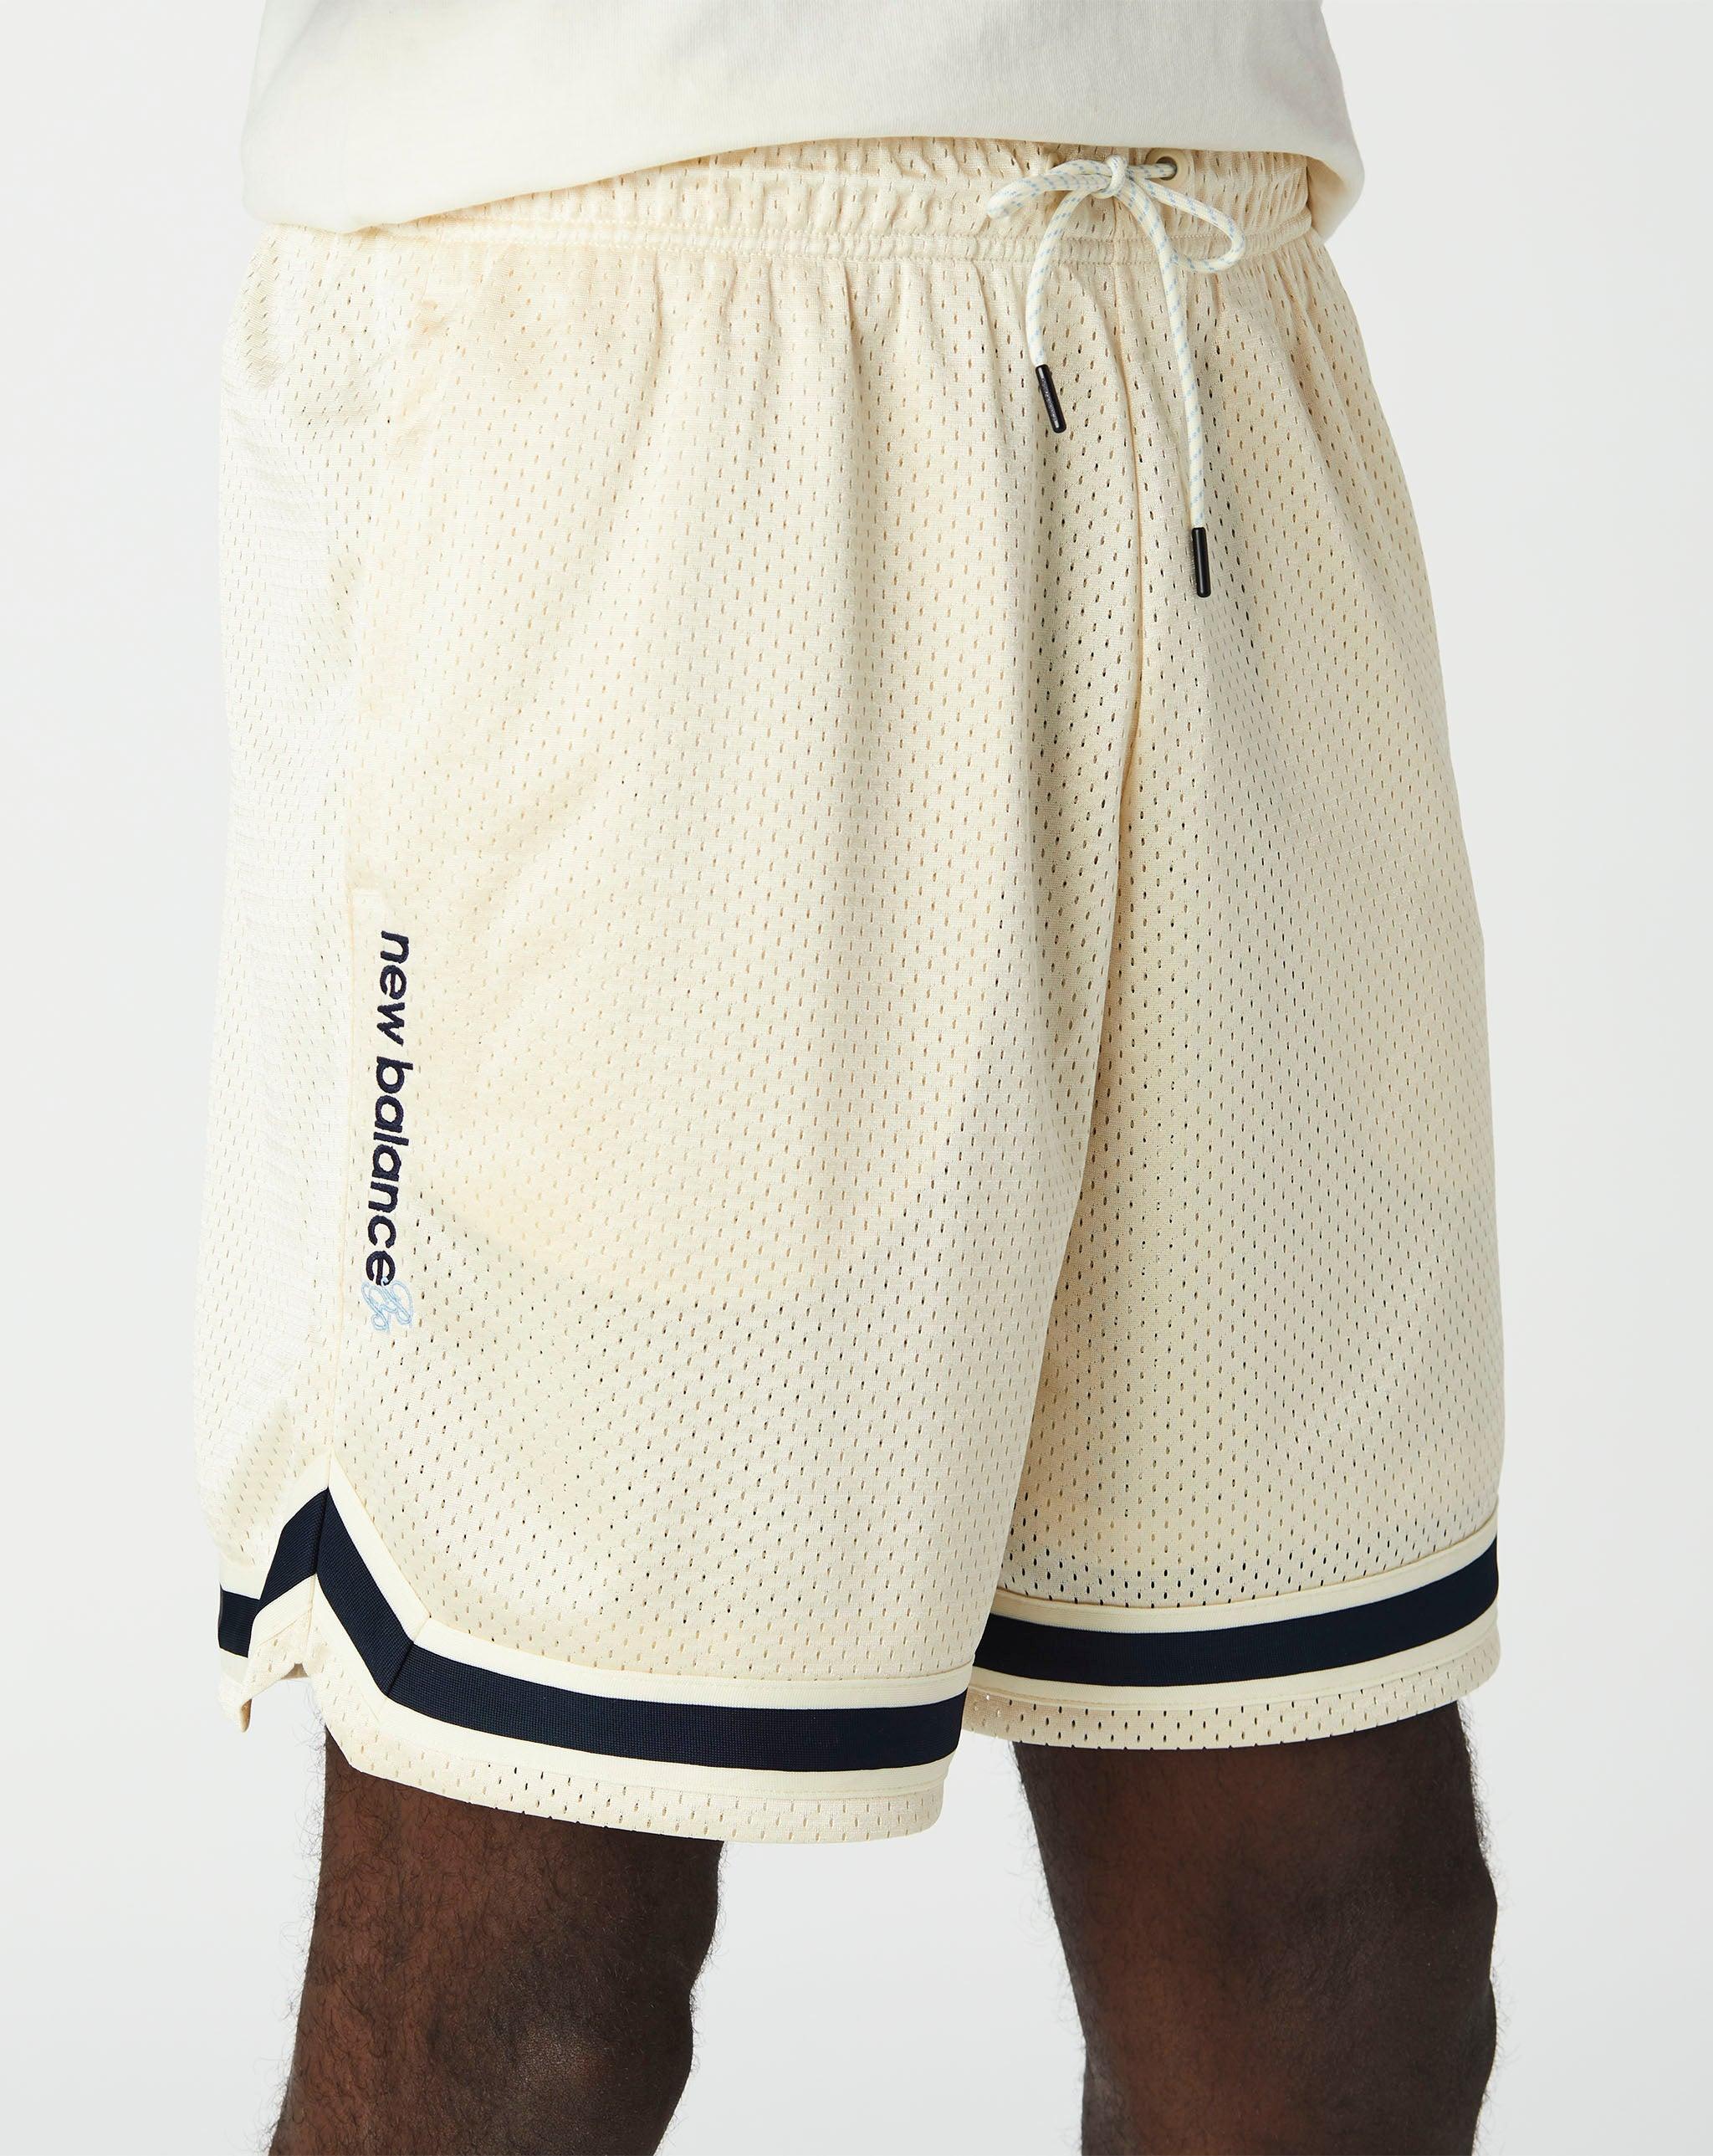 New Balance Rich Paul X Shorts in Natural for Men | Lyst